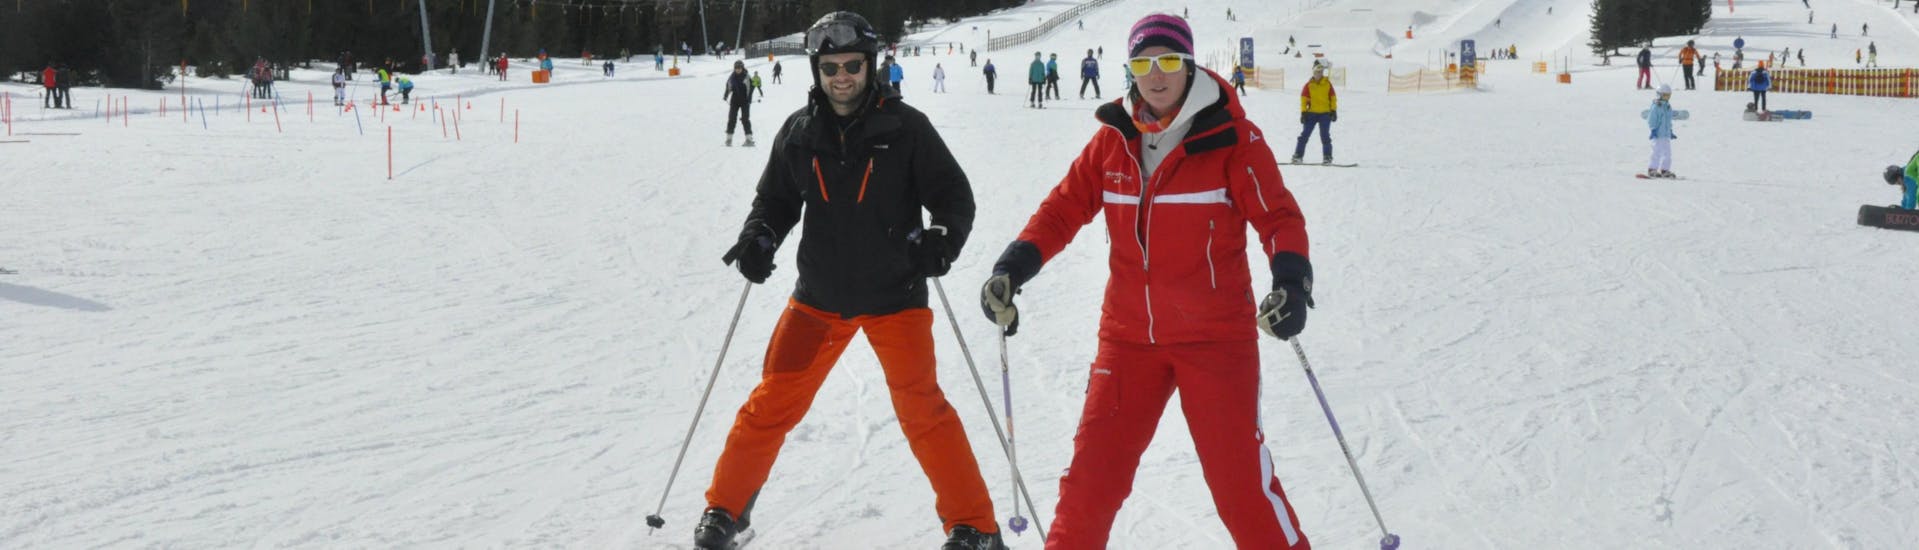 A skier with his private ski instructor during the private ski lessons for adults of all levels with the ski school Kreischberg - Mayer. 